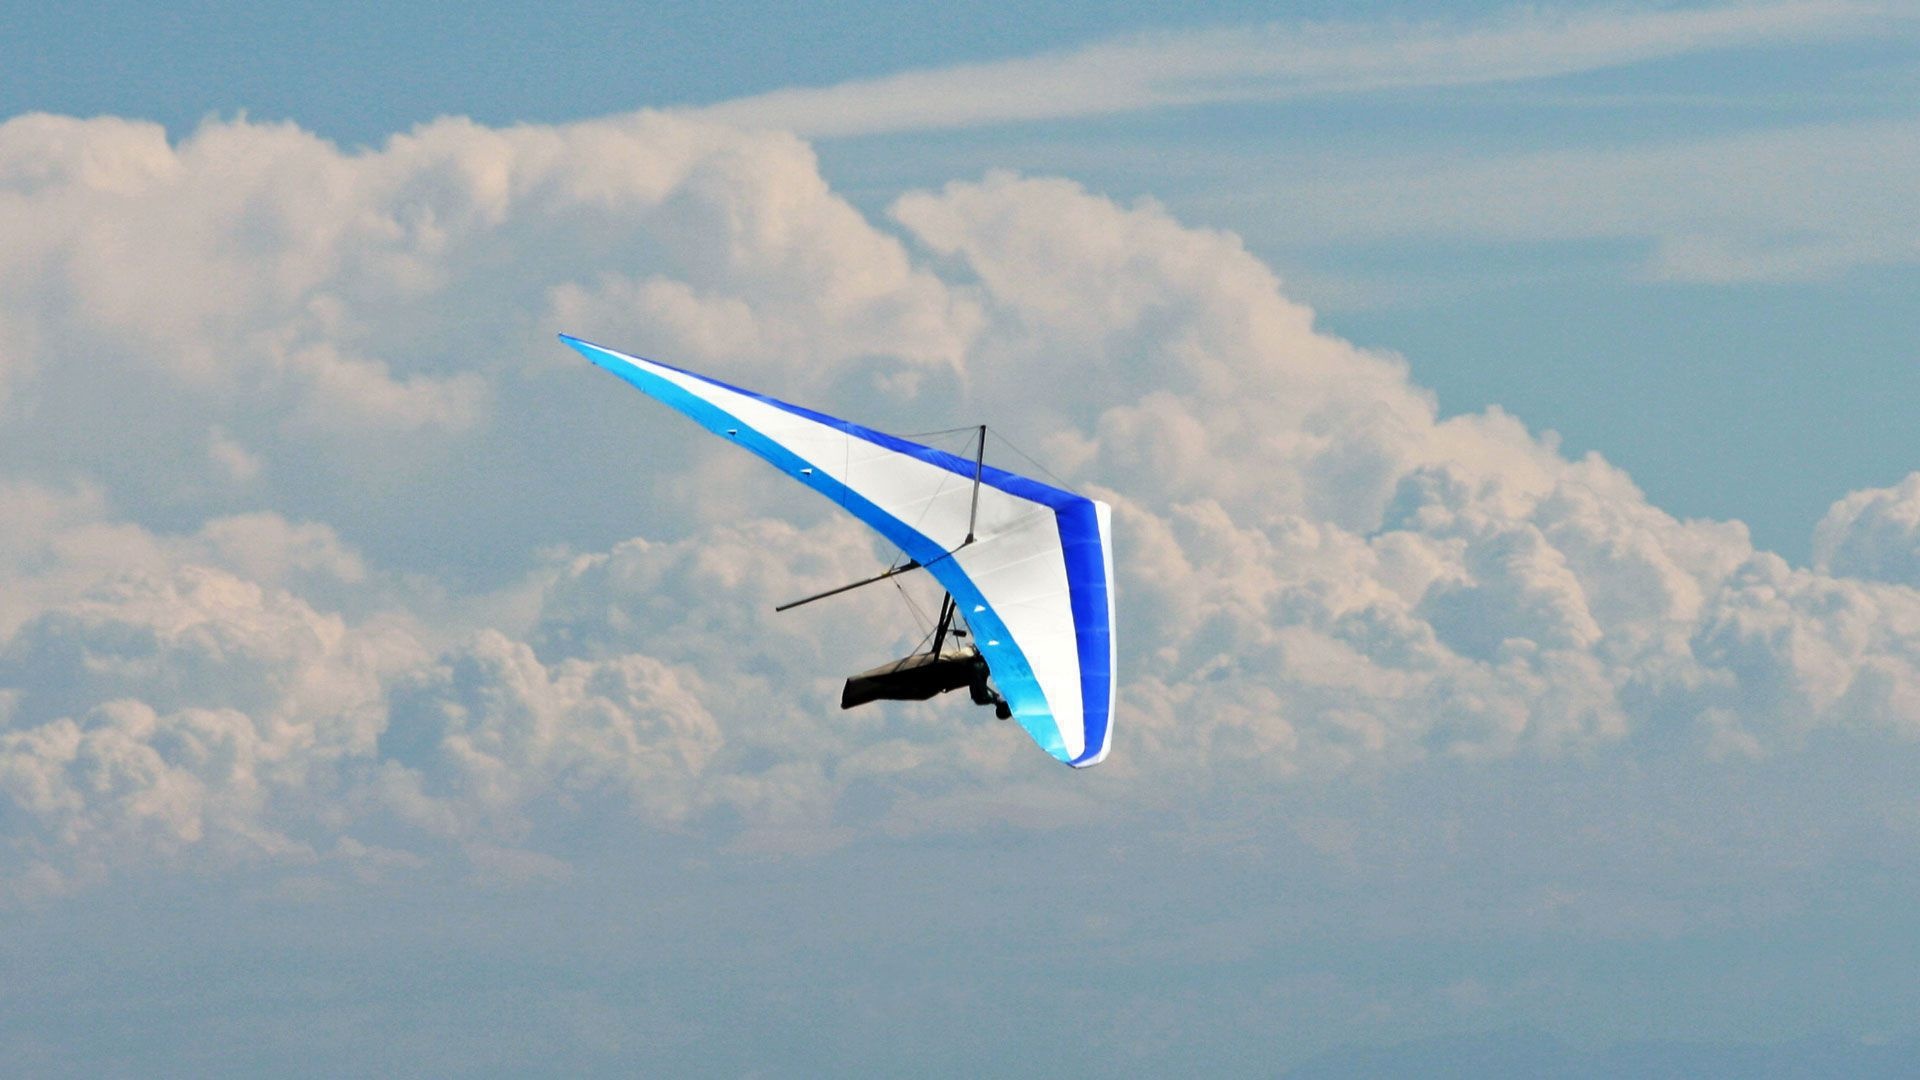 Gliding: Operated foot-launched hang glider in the air, High altitude, Extreme sport. 1920x1080 Full HD Wallpaper.